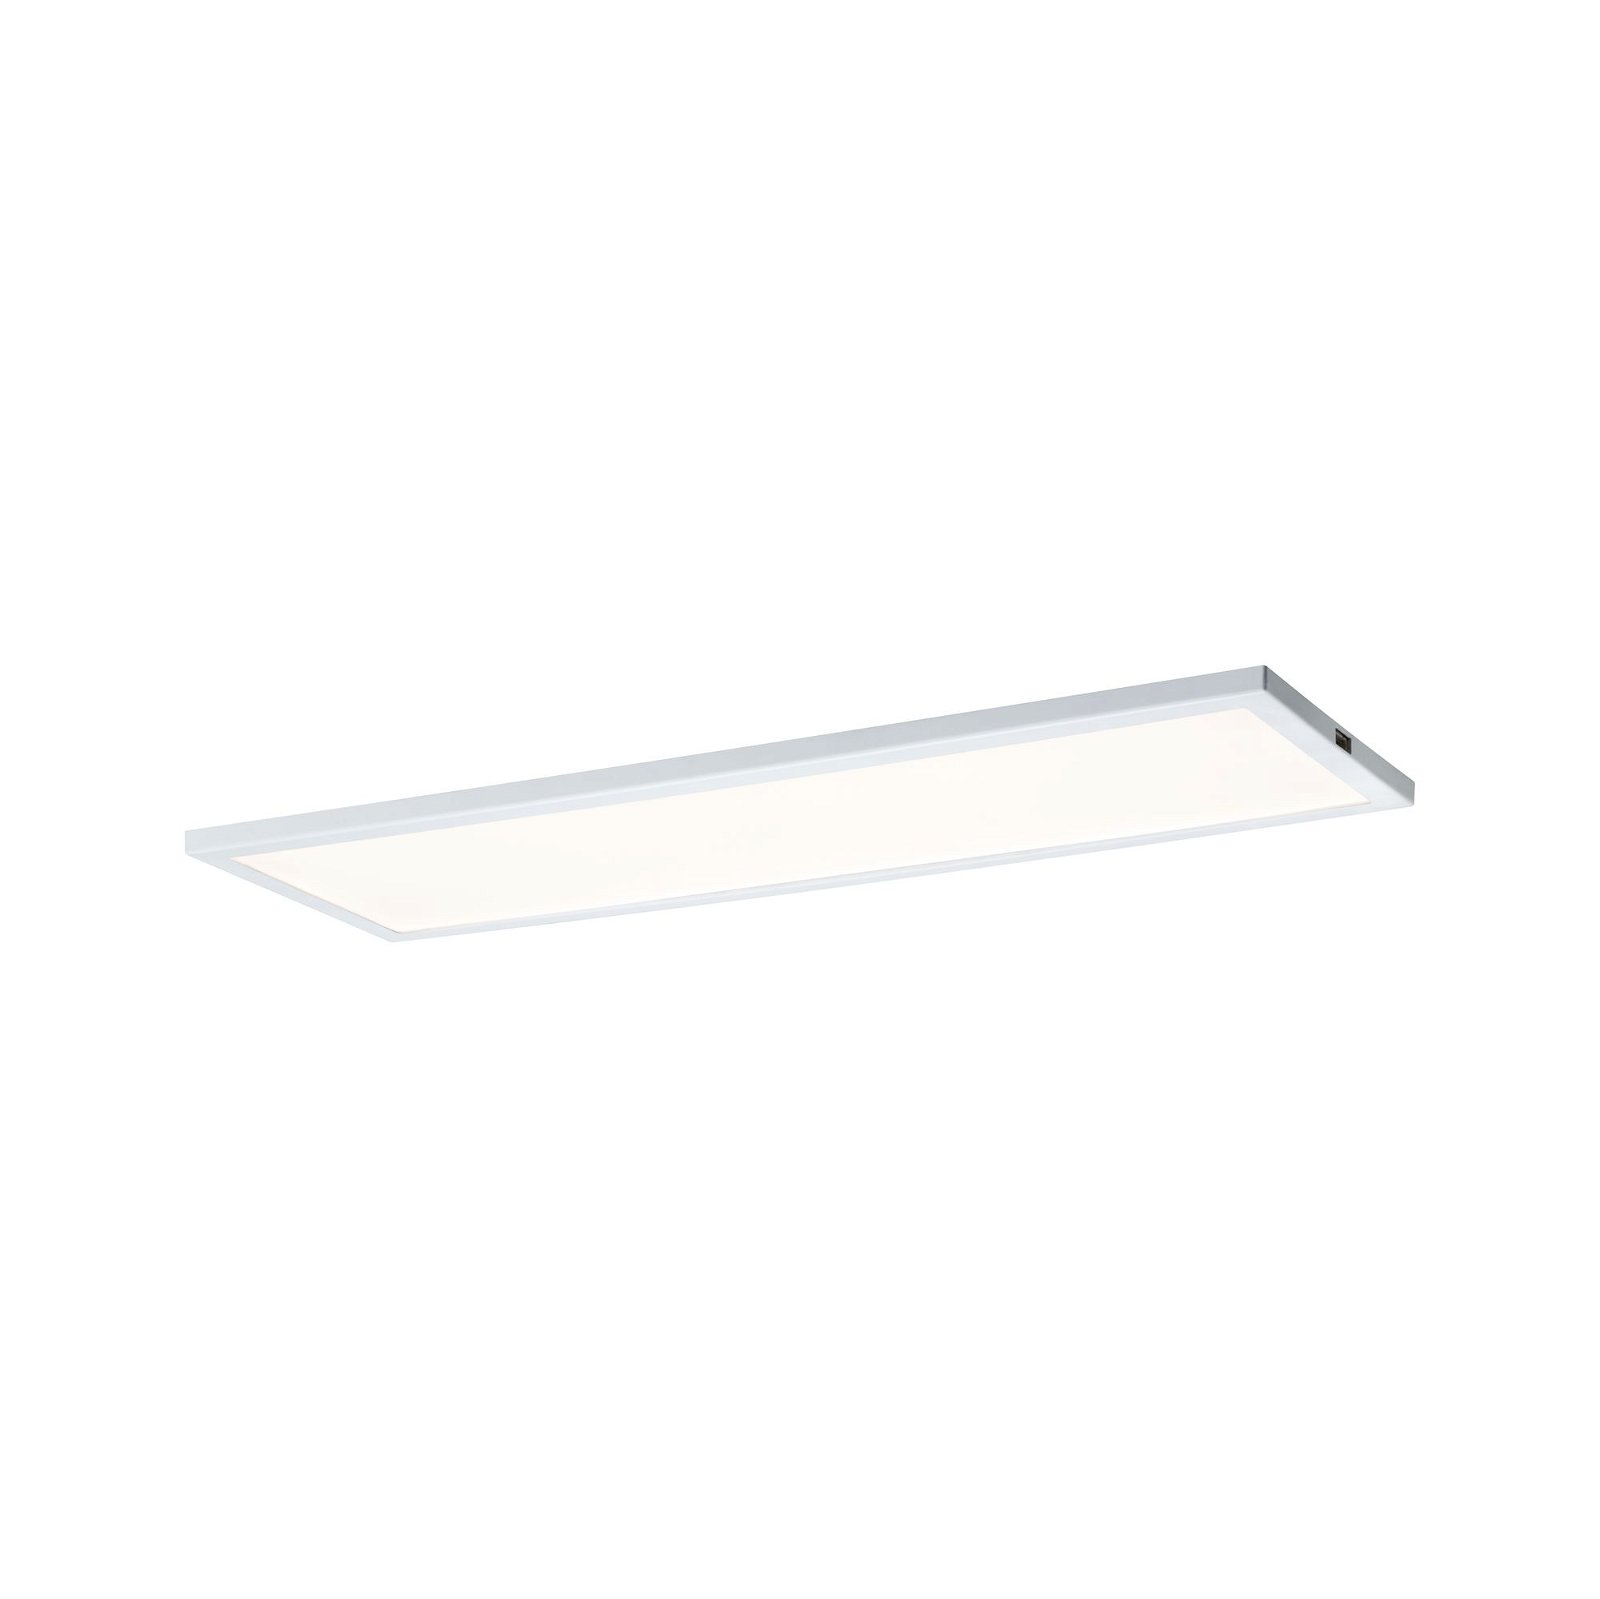 LED Under-cabinet luminaire Ace 300x7mm 520lm 2700K White/Satin dimmable